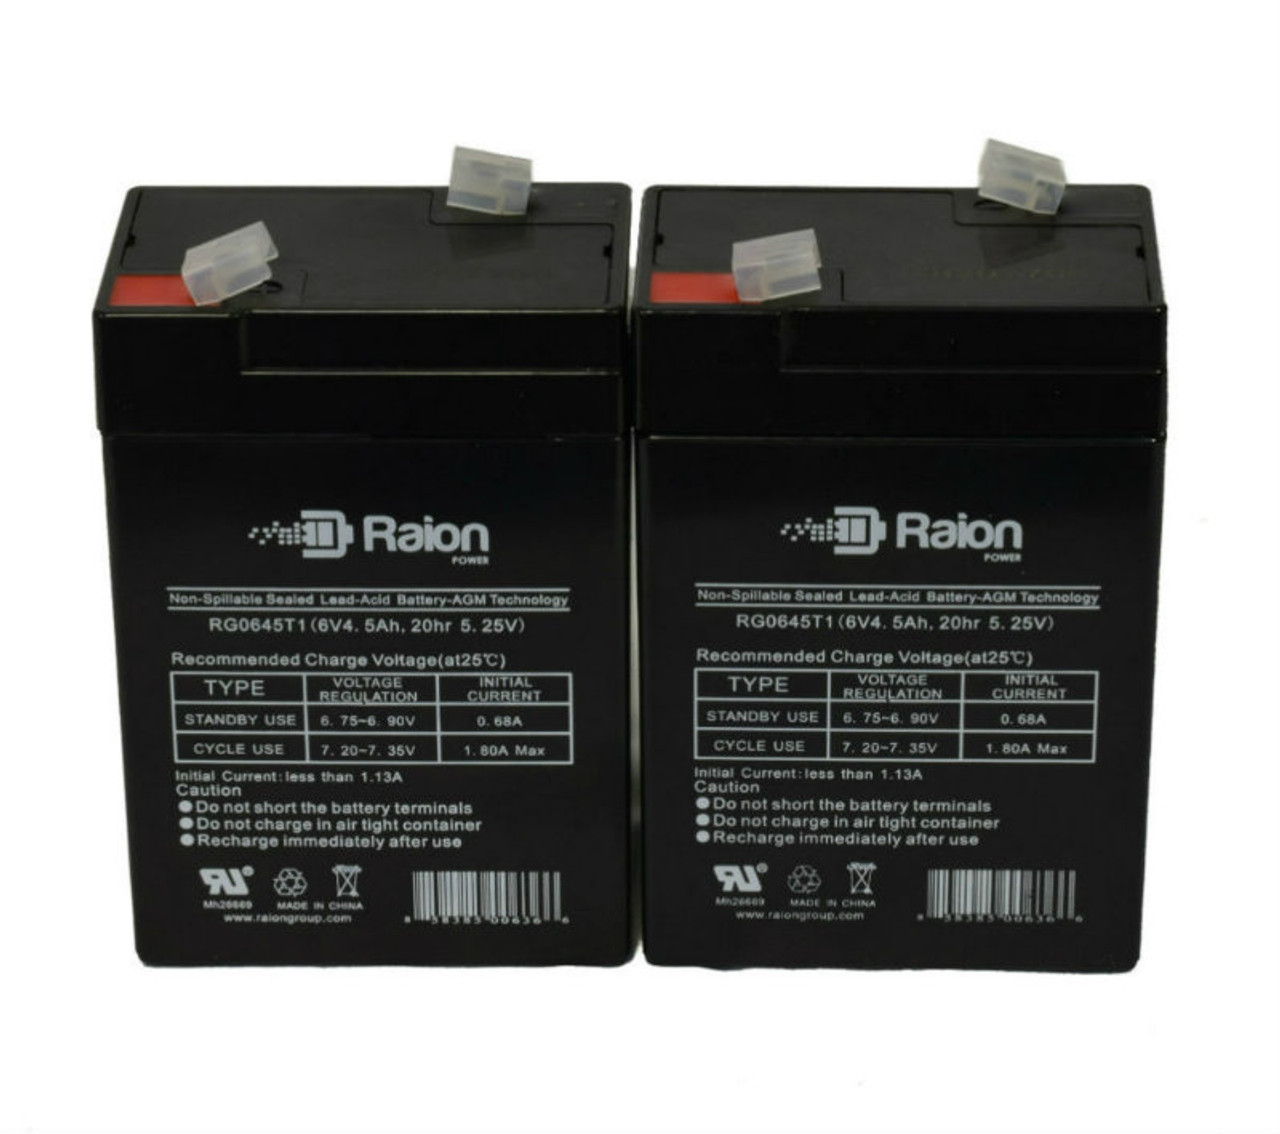 Raion Power 6 Volt 4.5Ah RG0645T1 Replacement Battery for VCELL 6VC4.5 - 2 Pack